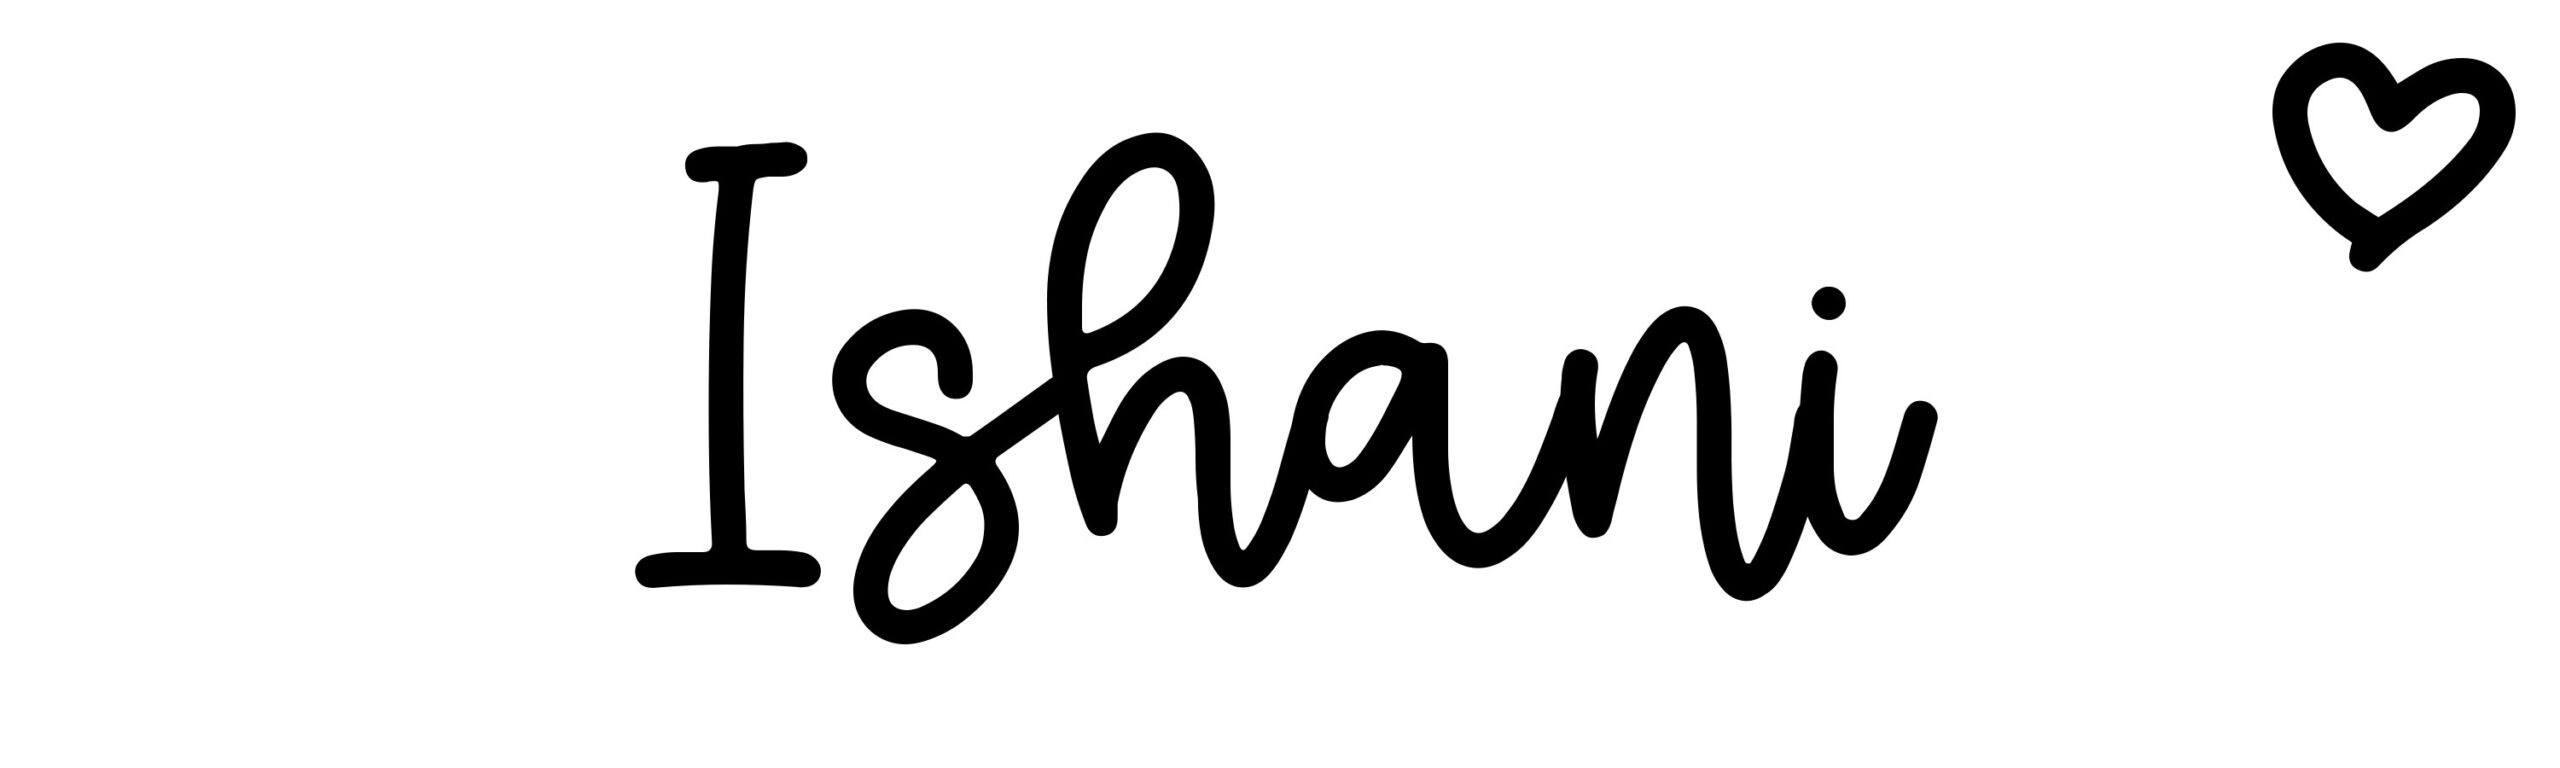 Ishani - Name meaning, origin, variations and more